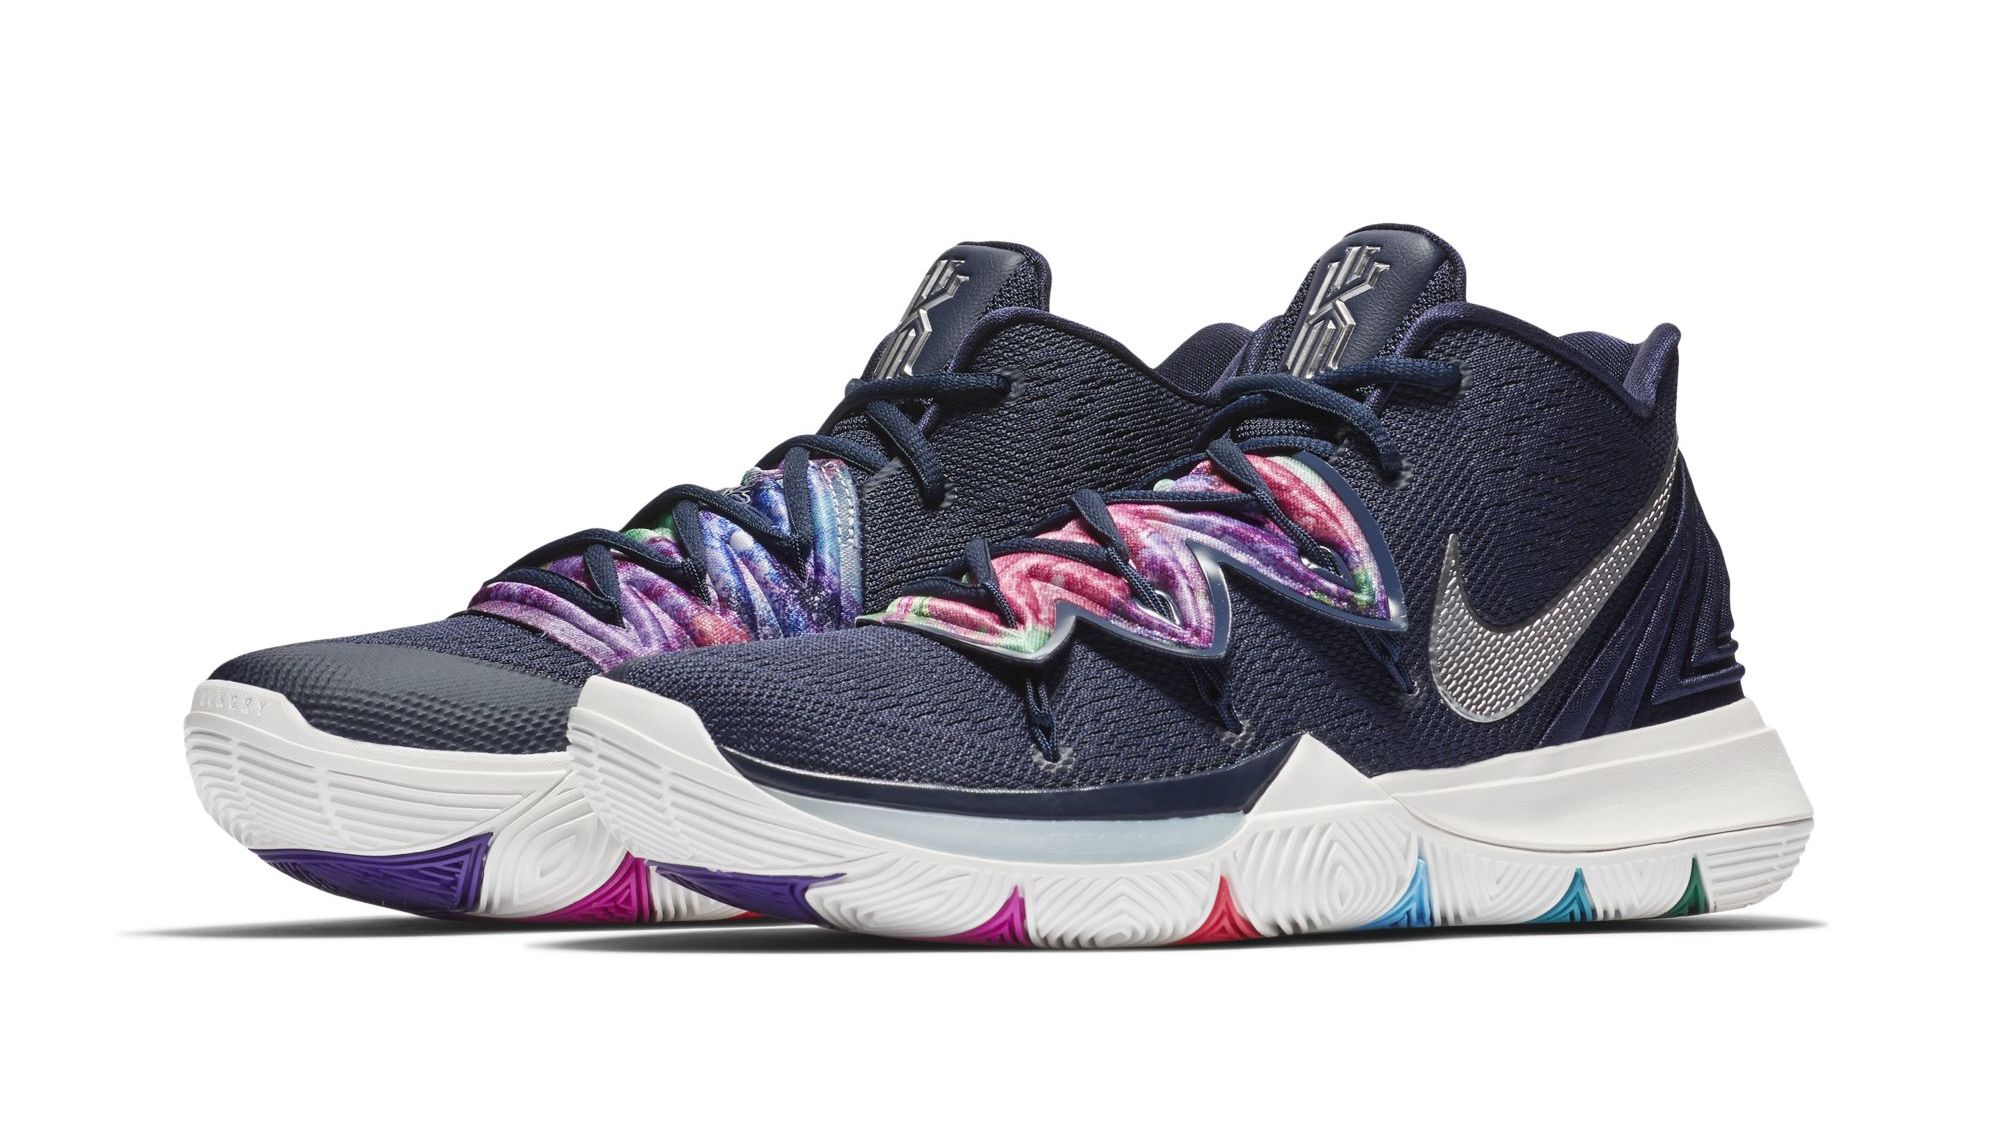 kyrie 5 neon blends release date